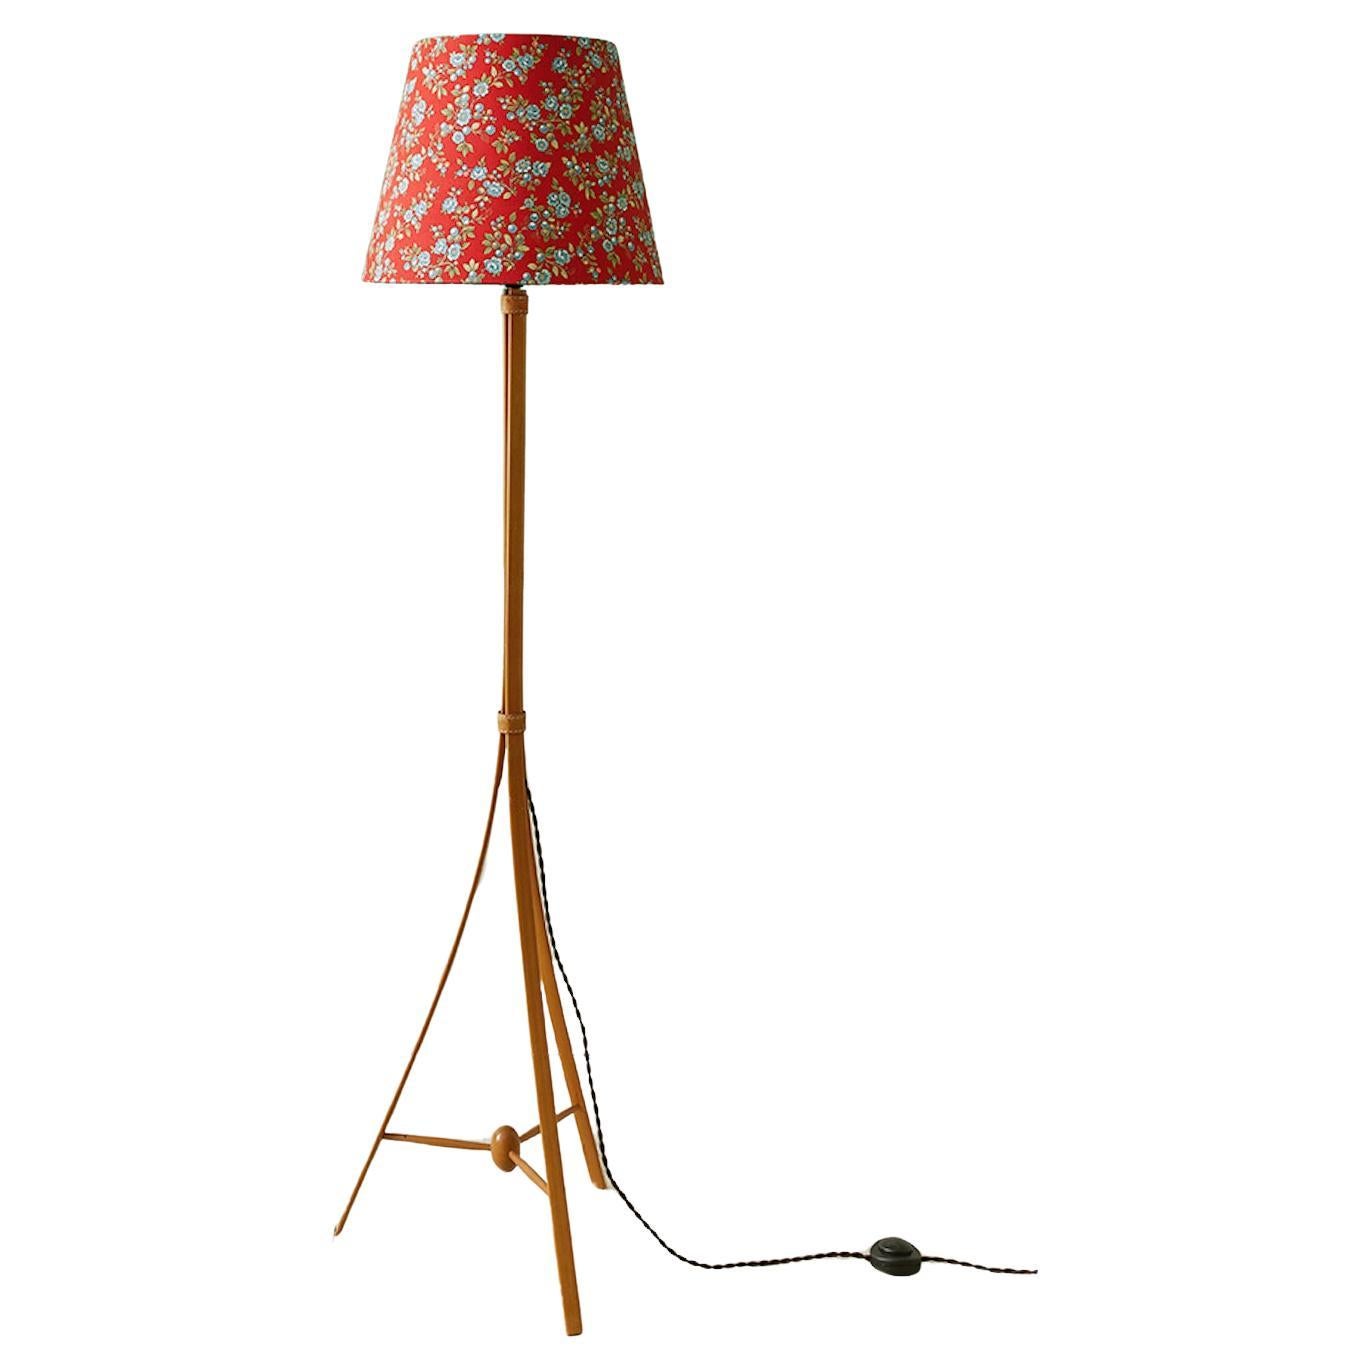 Vintage Alf Svensson Floor Lamp in Birch with Customized Shade, Sweden, 1950s For Sale